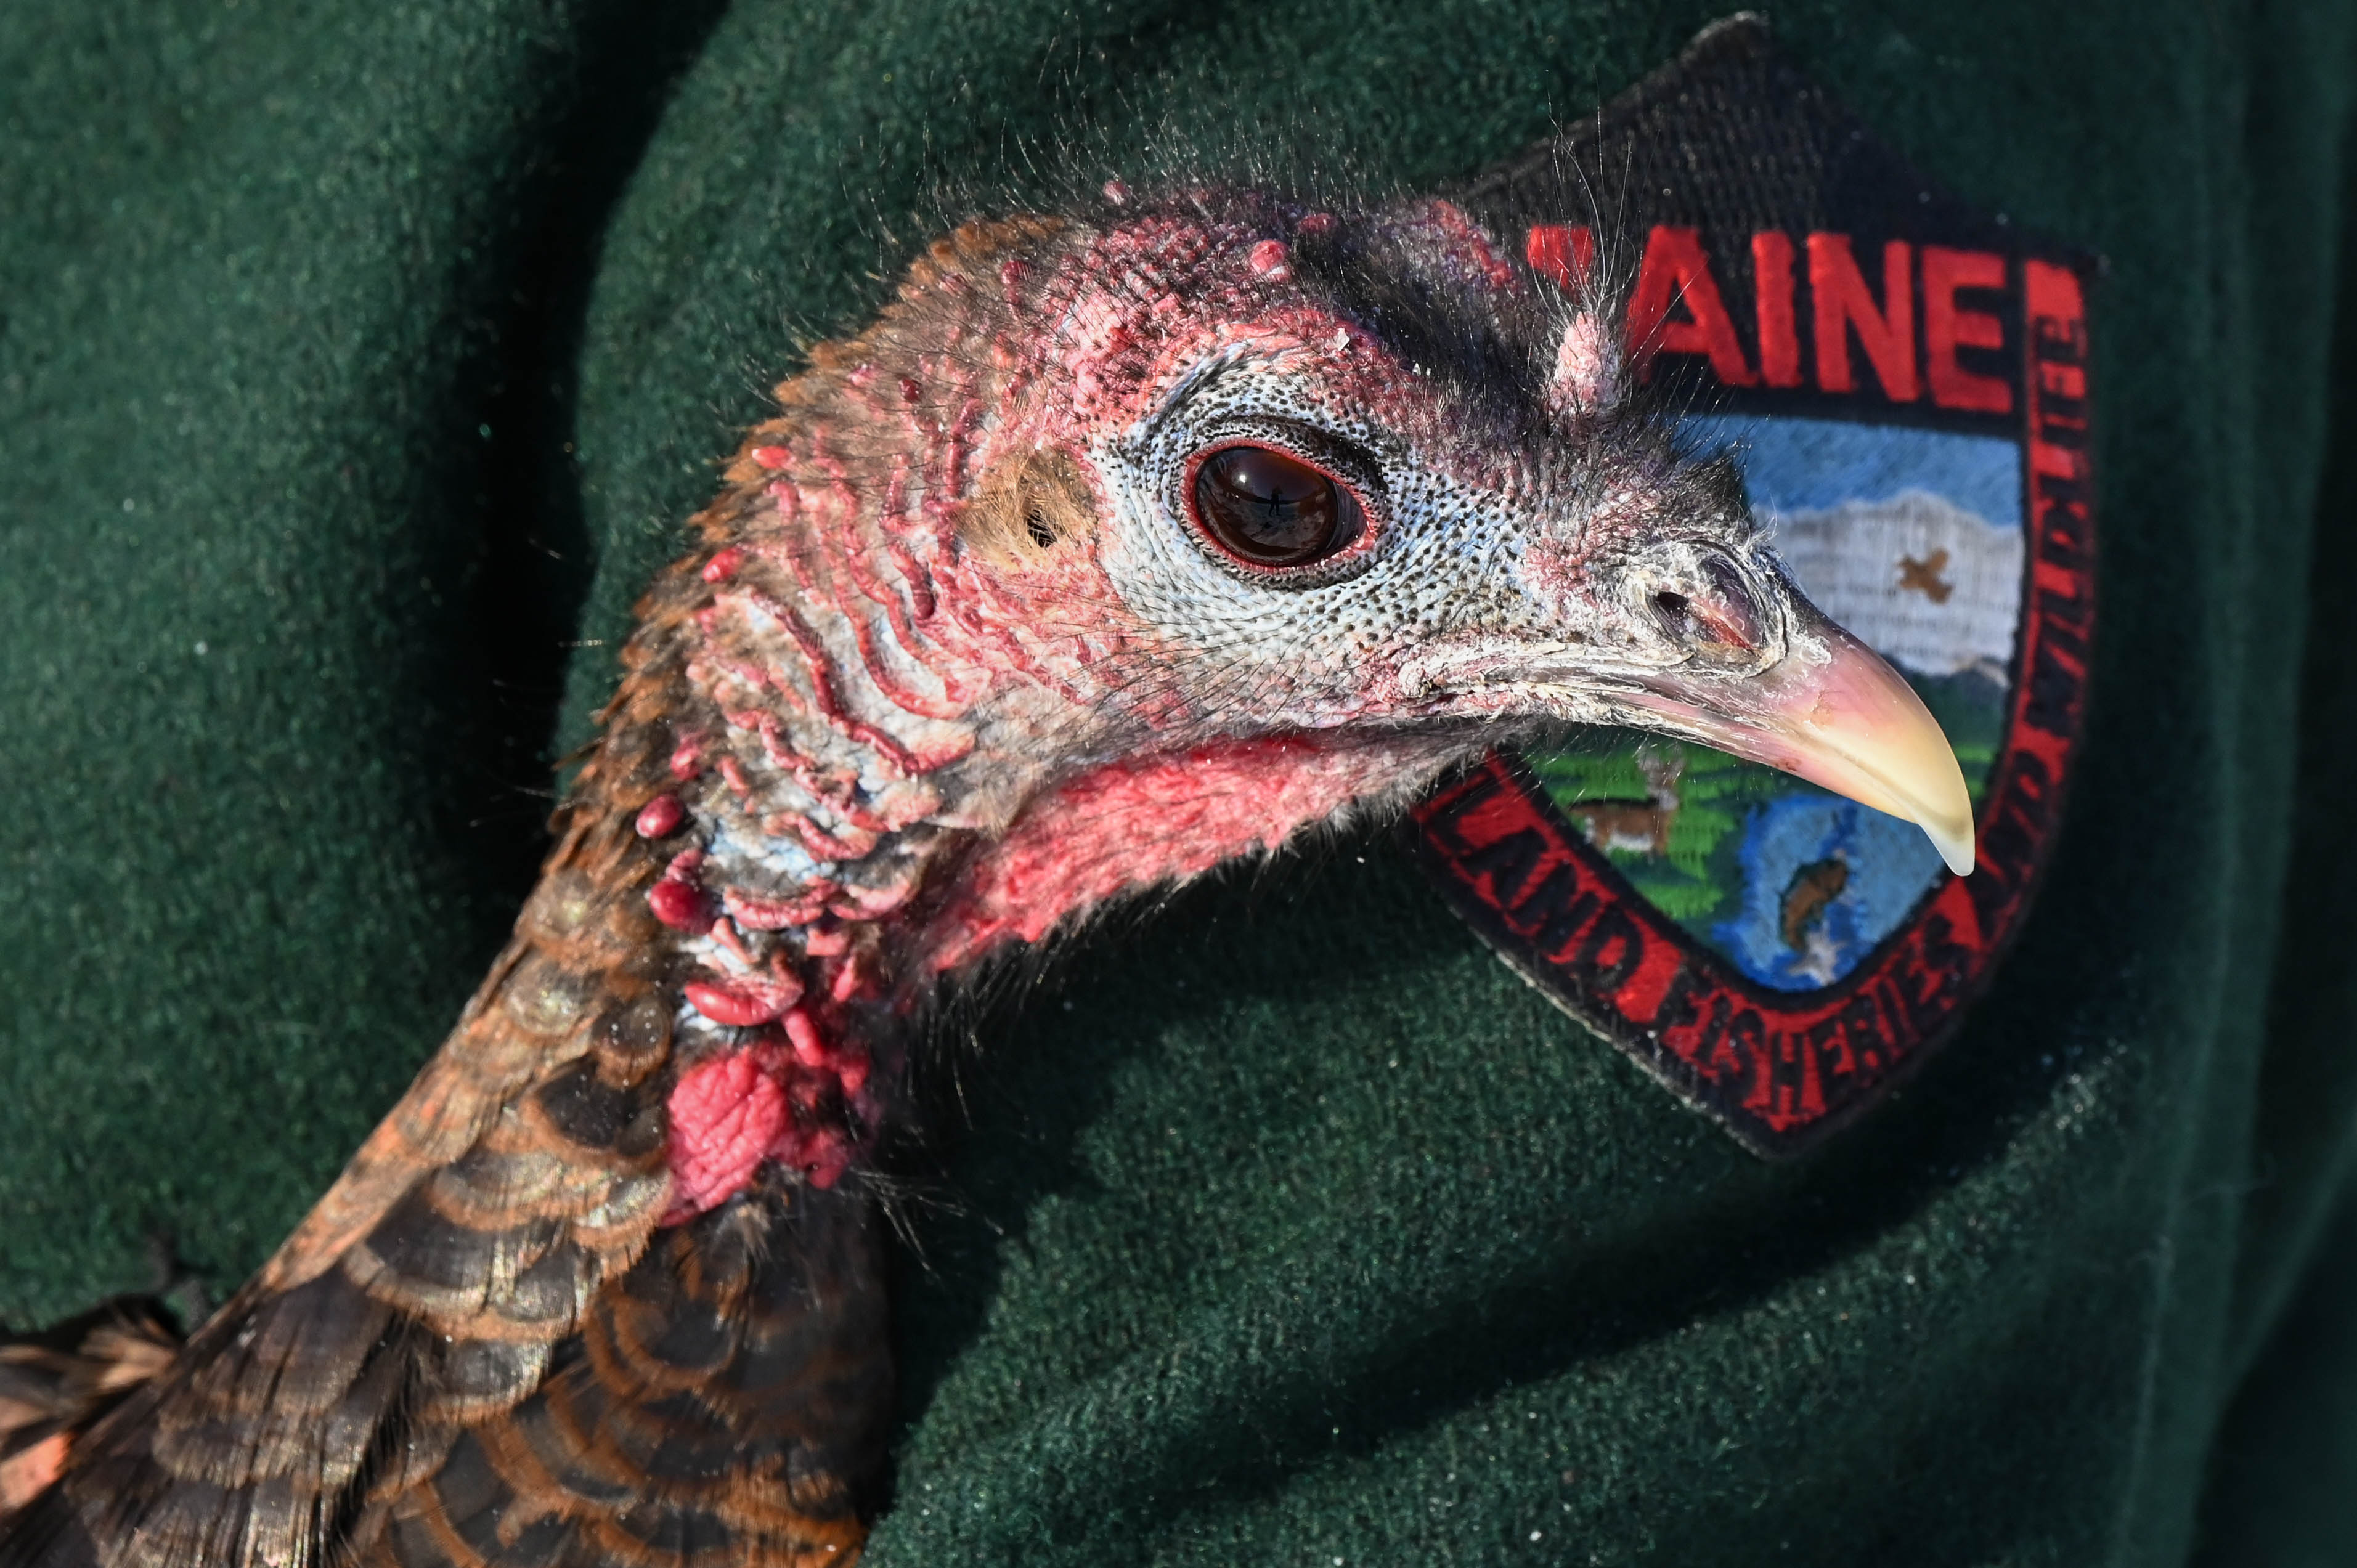 A close up of a wild turkey's face with the Maine Department of Inland Fisheries and Wildlife patch on the sleeve of a dark green wool coat in the background.